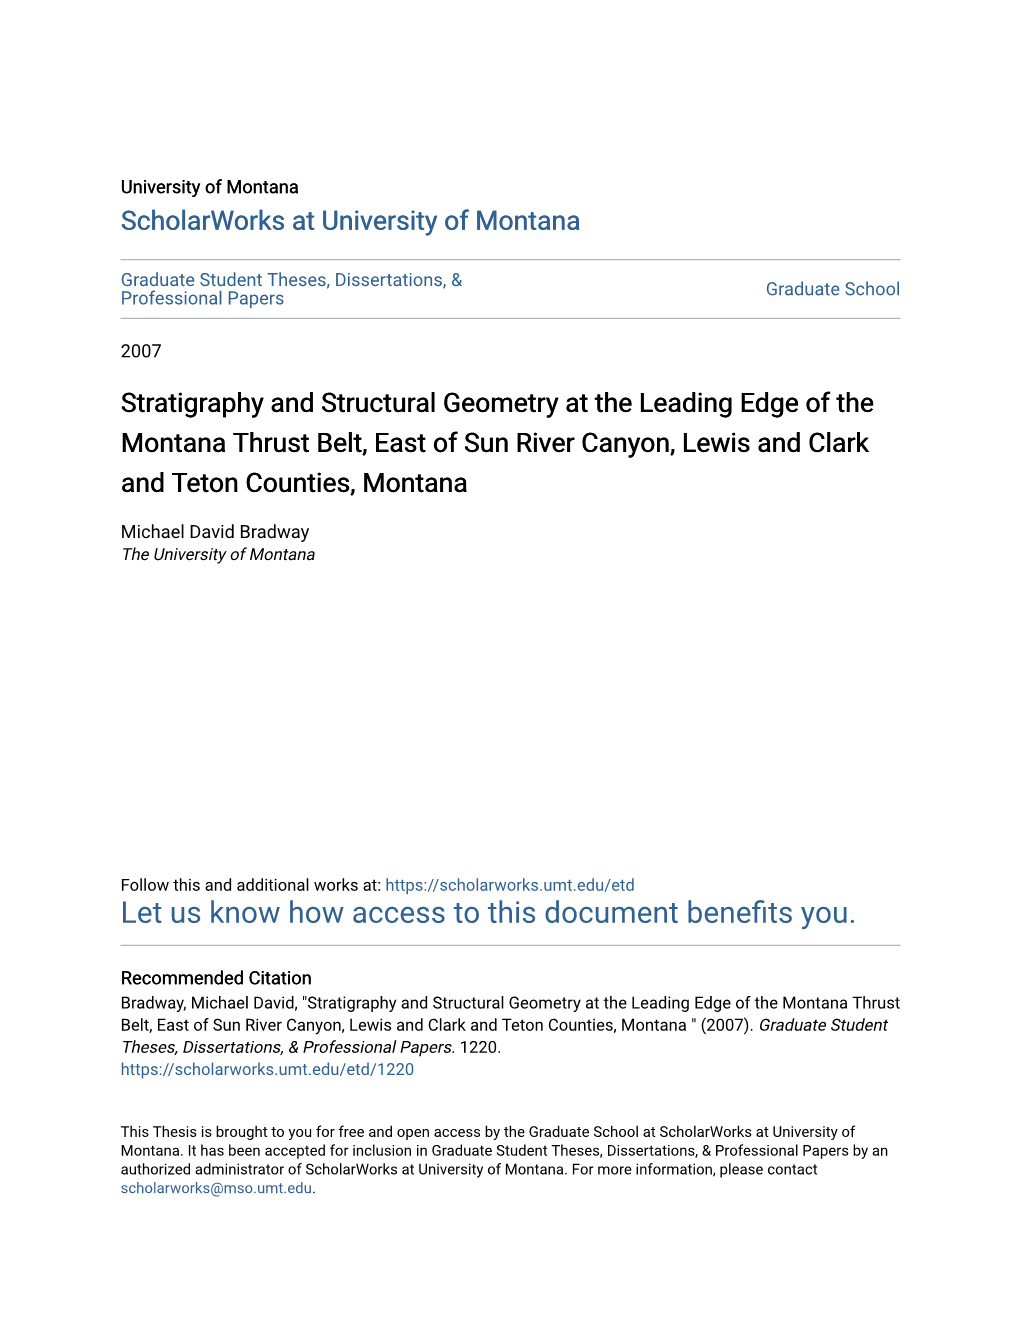 Stratigraphy and Structural Geometry at the Leading Edge of the Montana Thrust Belt, East of Sun River Canyon, Lewis and Clark and Teton Counties, Montana